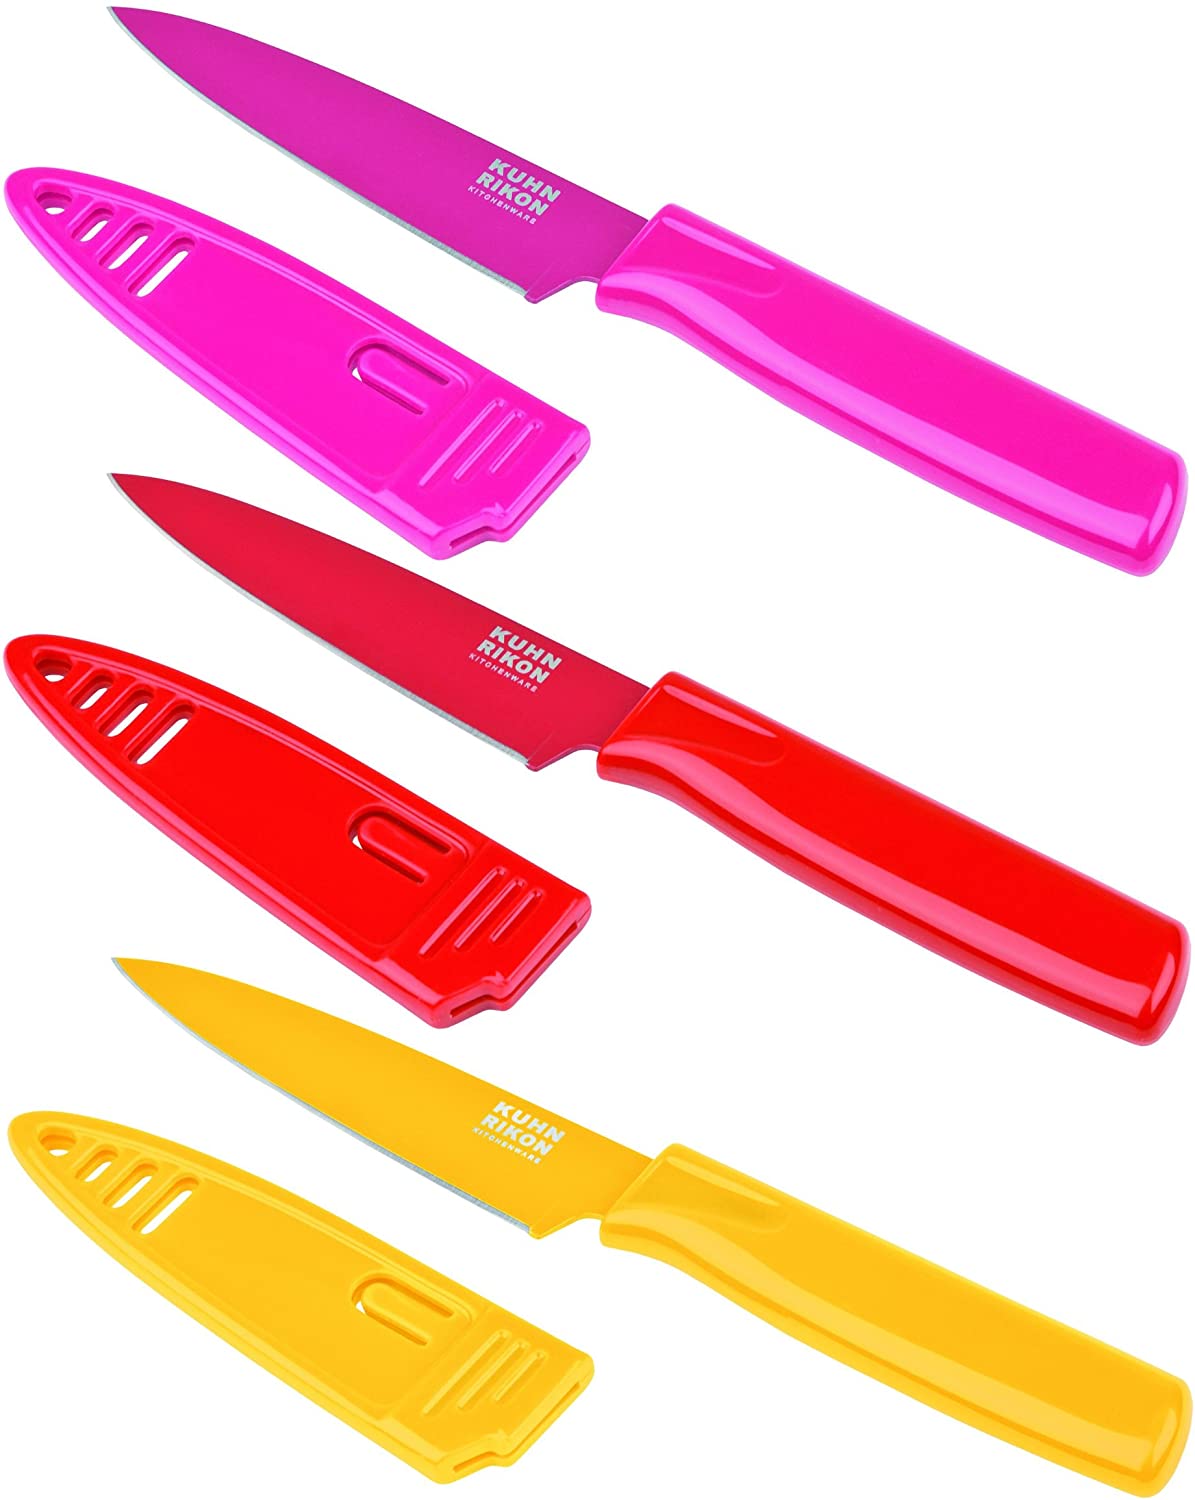 KUHN RIKON Colori 22396 Knives Set of 3 Vegetable Knives 1 Offset Knife Set Yellow / Red / Fuchsia 19.5 cm with Blade Guard